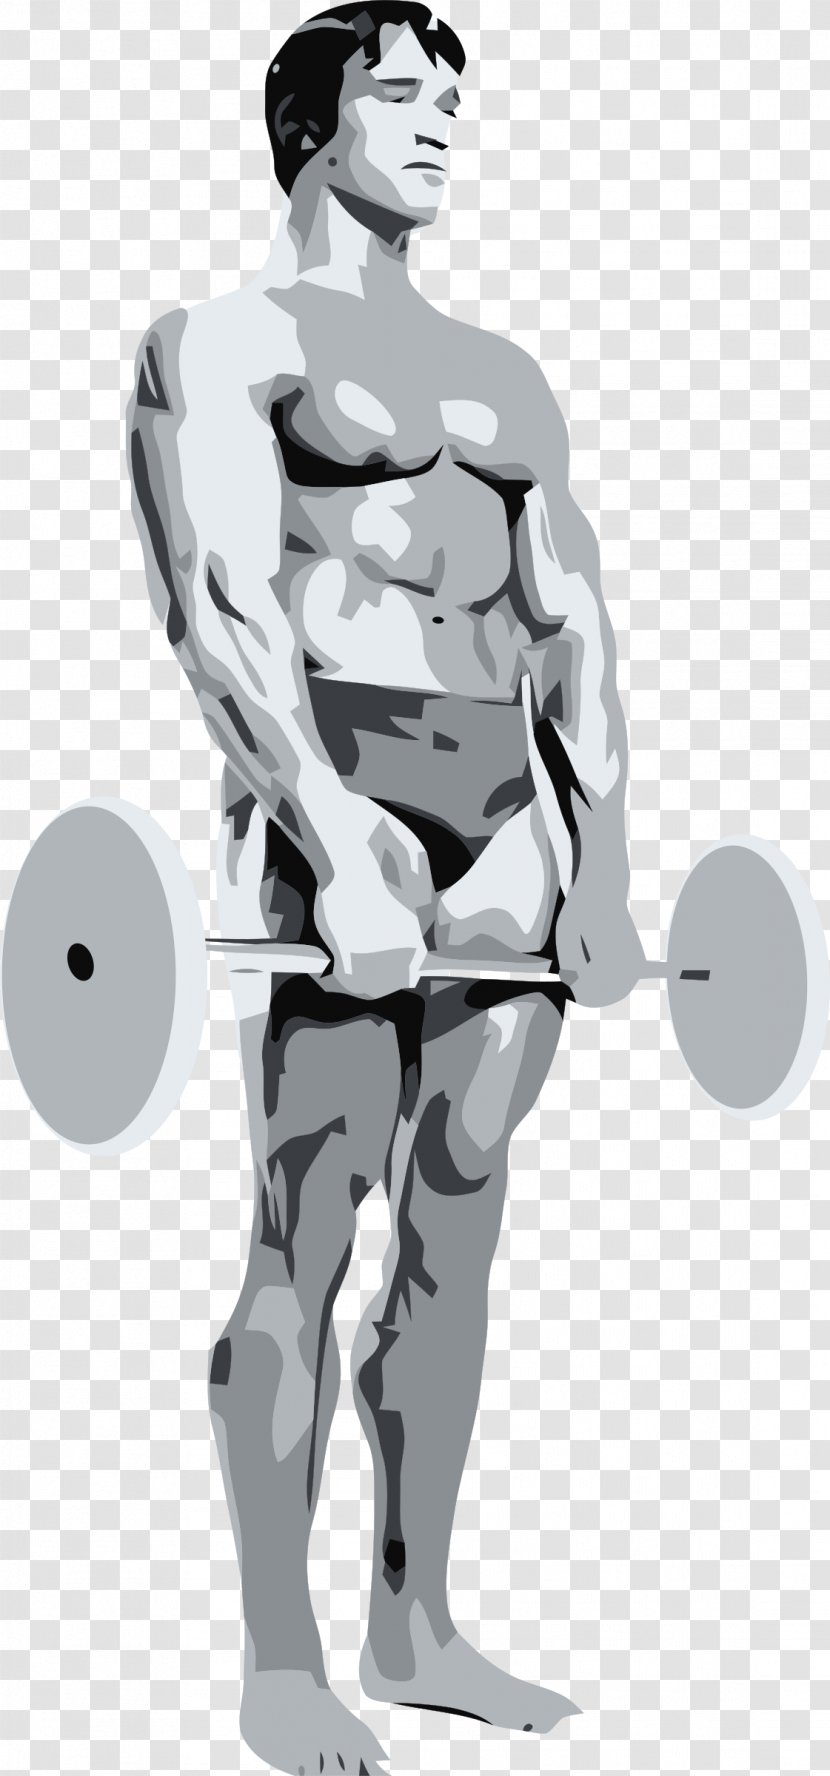 Mr. Olympia Bodybuilding Physical Exercise Fitness Centre Clip Art - Silhouette - Body Transparent PNG